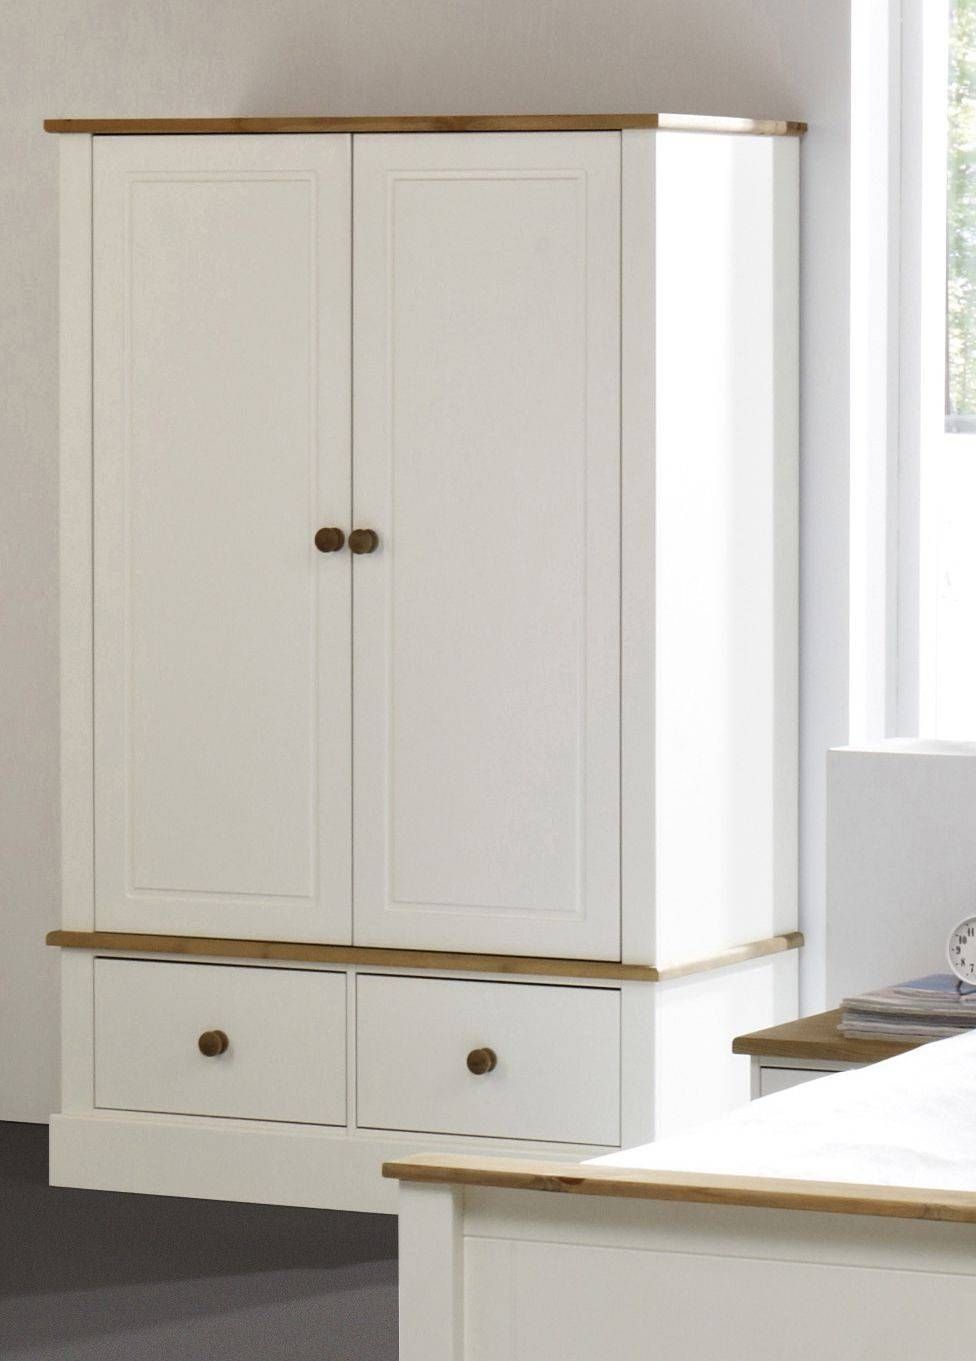 Balmoral White Double Wardrobe With 2 Drawers | Bedroom Furniture With White Wardrobes With Drawers (View 6 of 15)